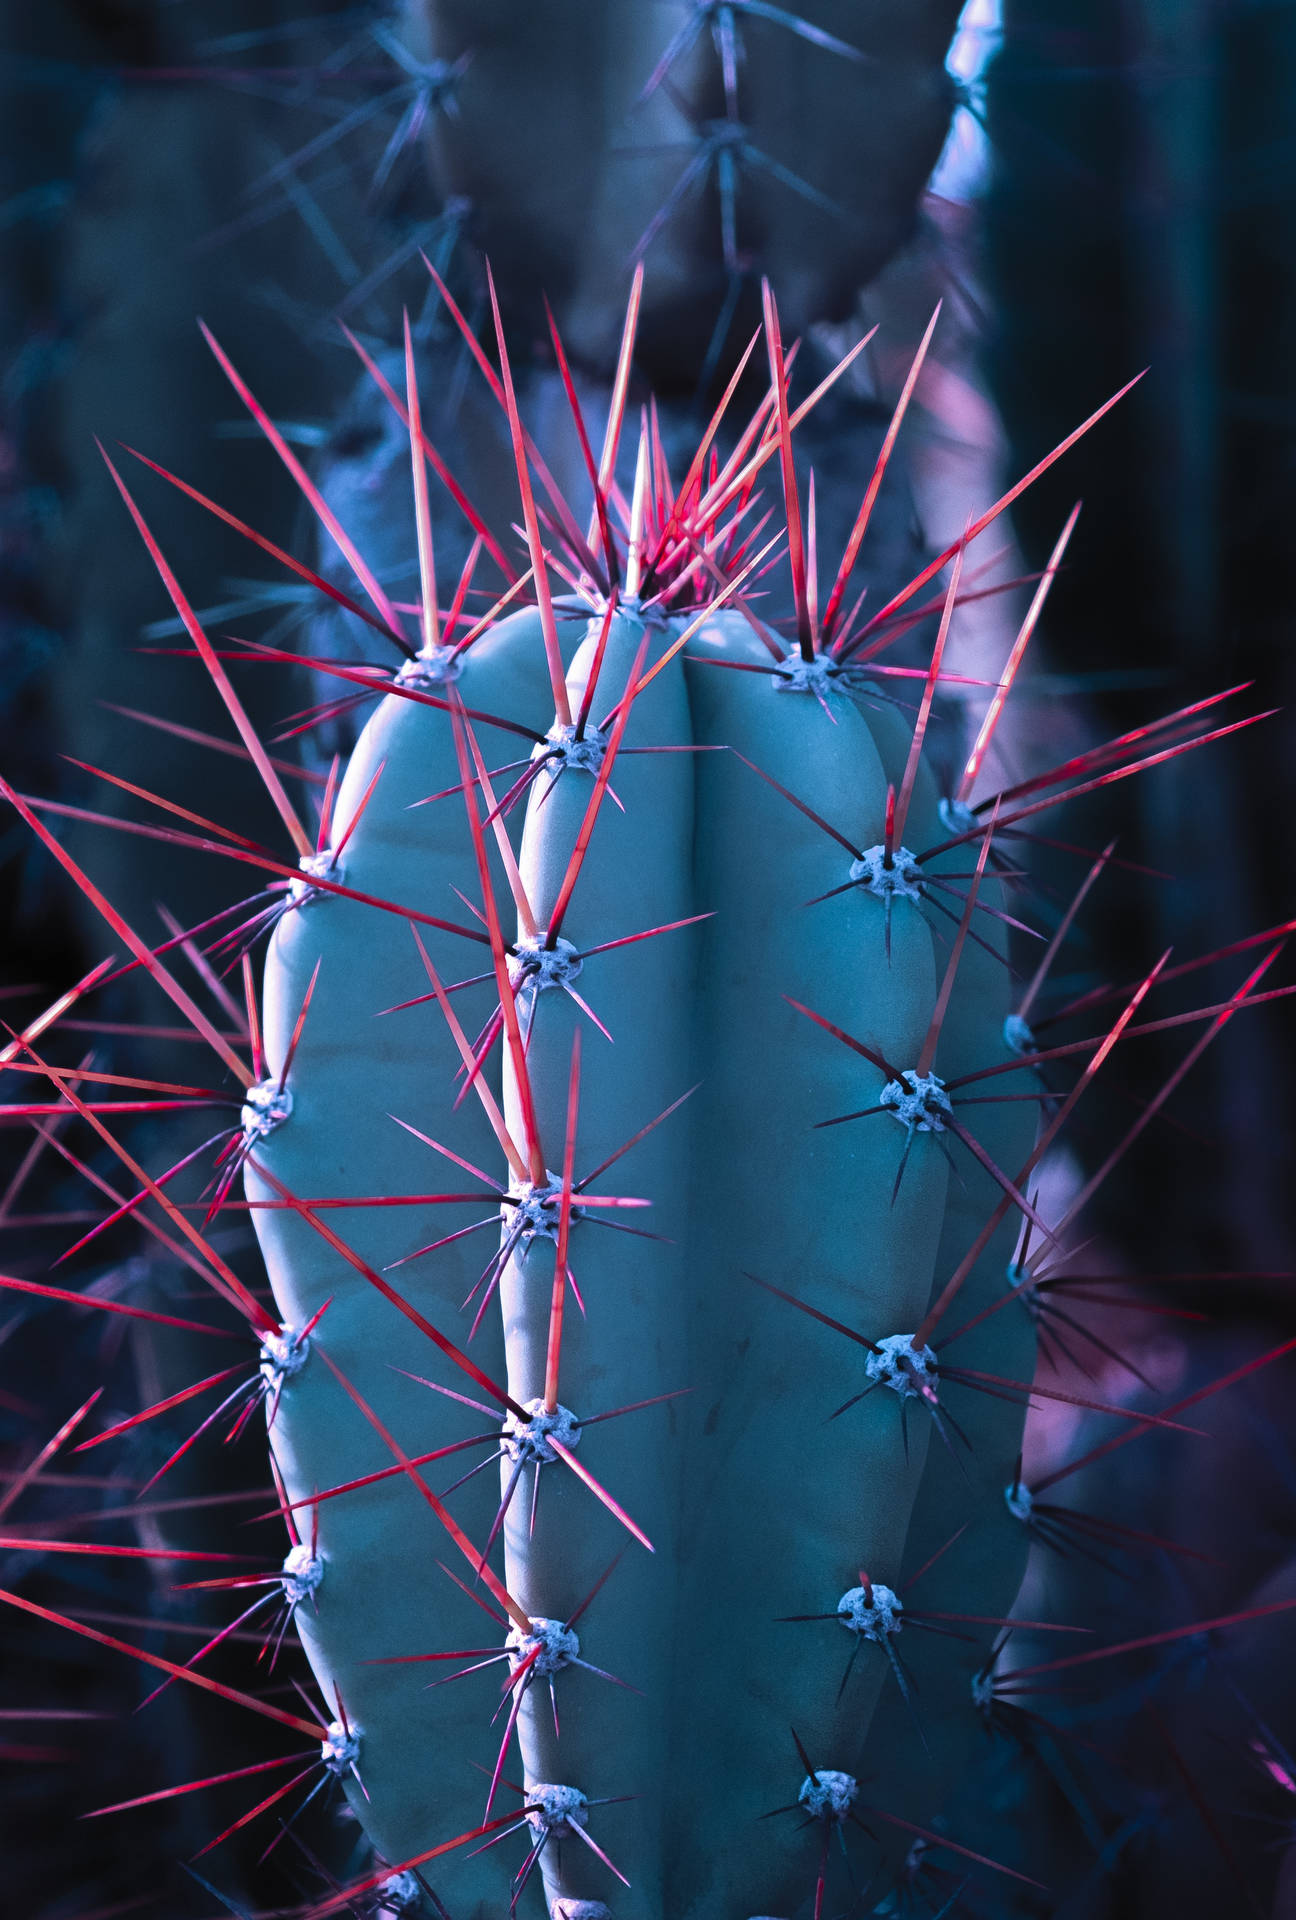 Cactus 2597X3847 Wallpaper and Background Image